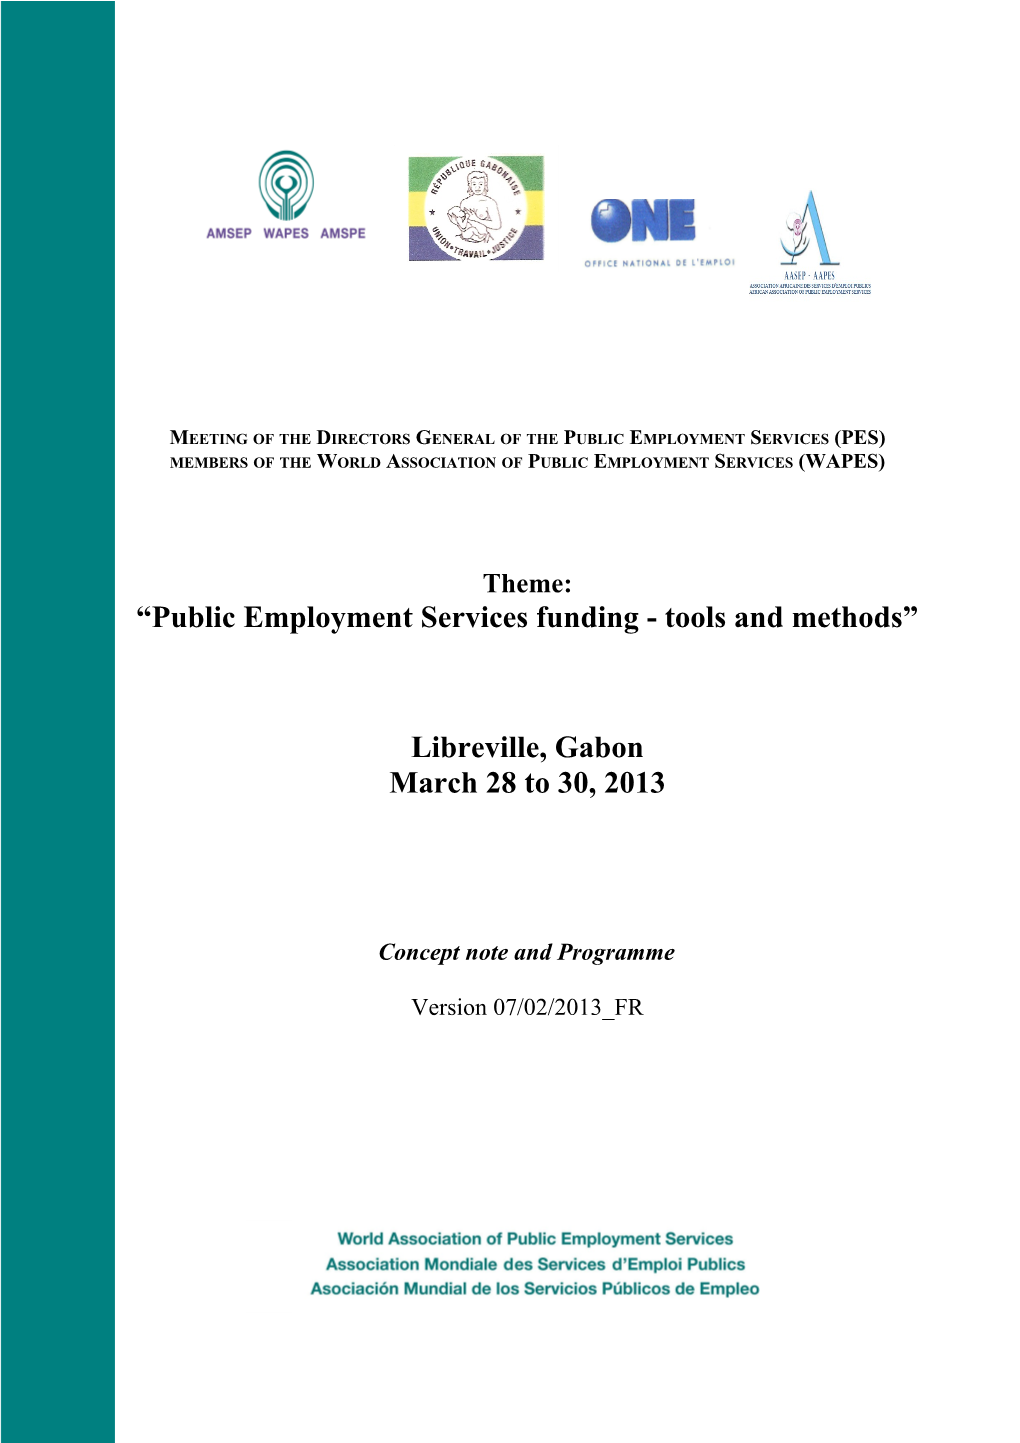 Public Employment Services Funding - Tools and Methods